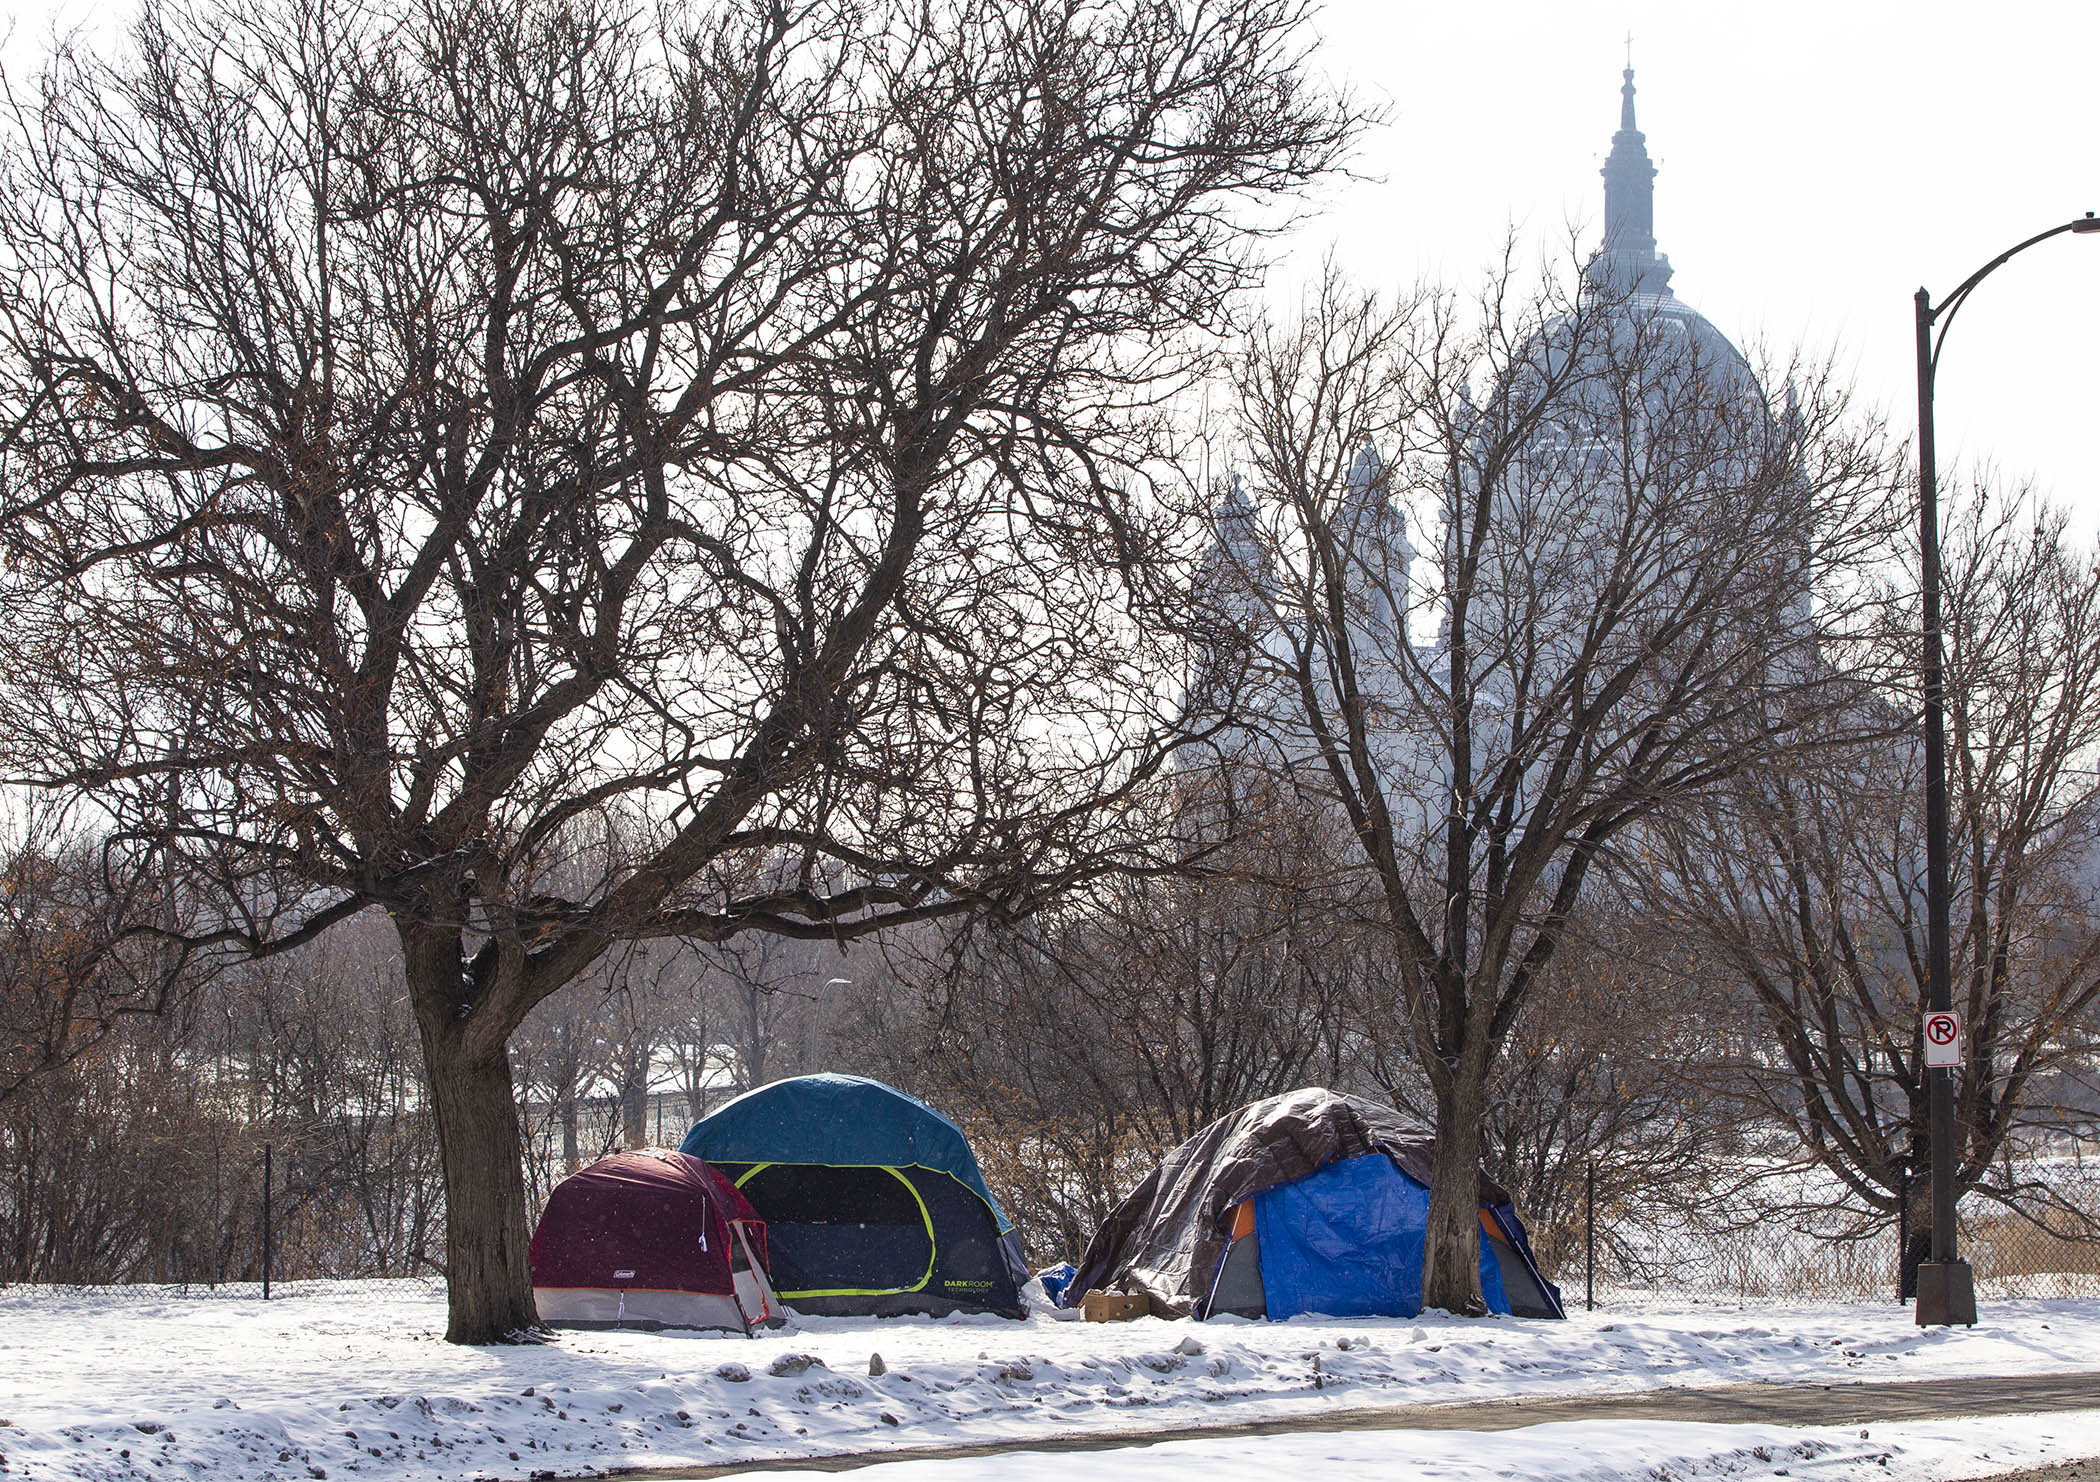 A homeless encampment near the State Capitol in St. Paul, pictured in 2021. (House Photography file photo)